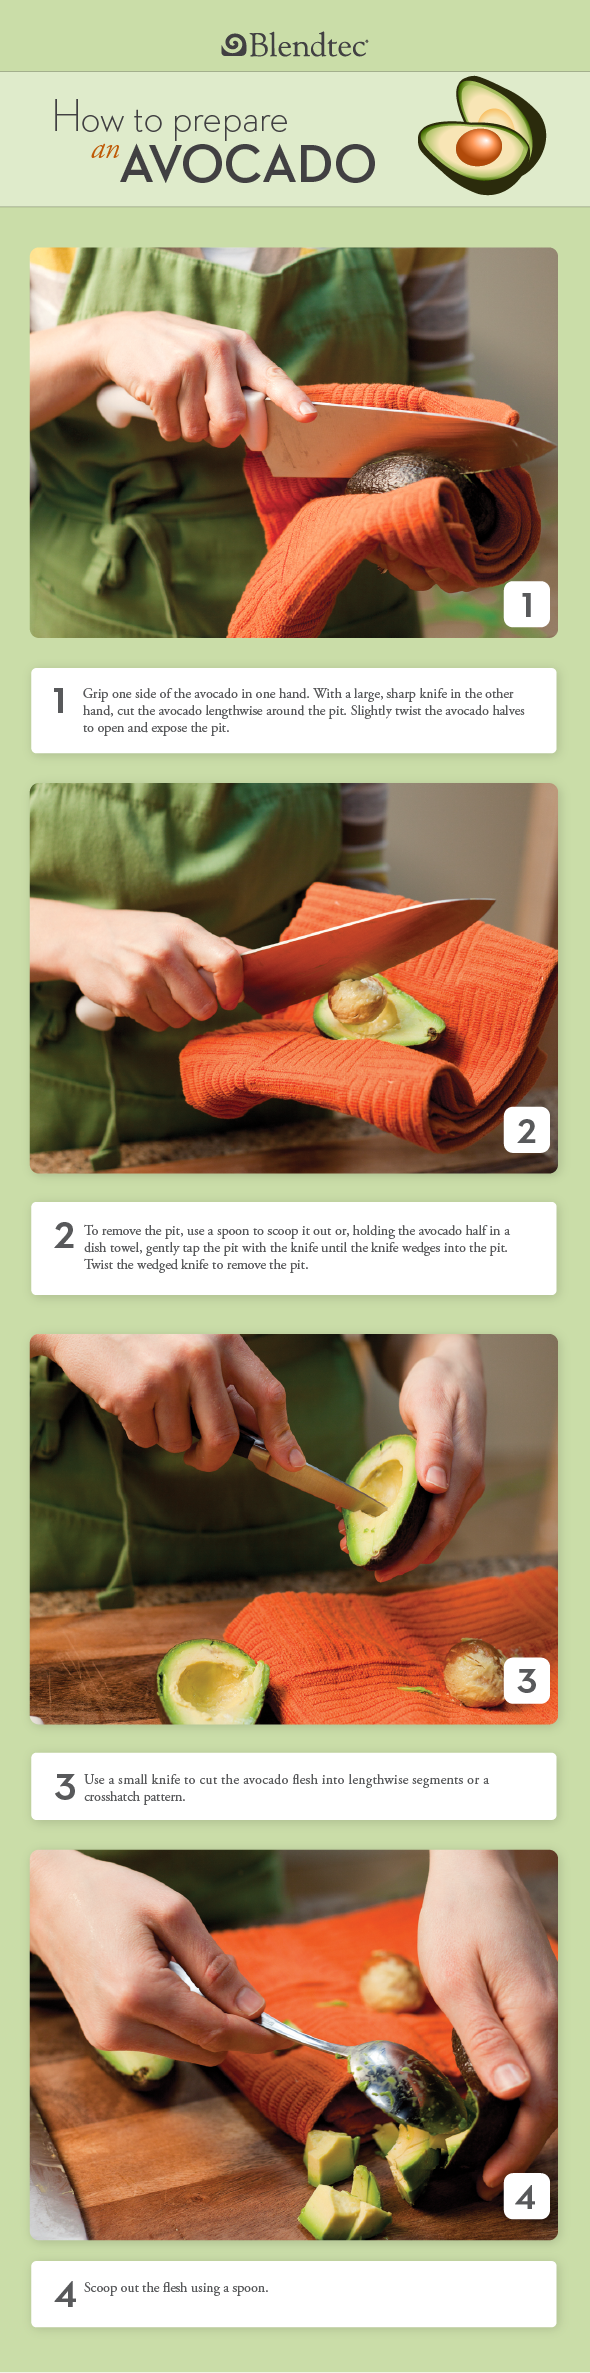 Graphic showing how to prepare an avocado